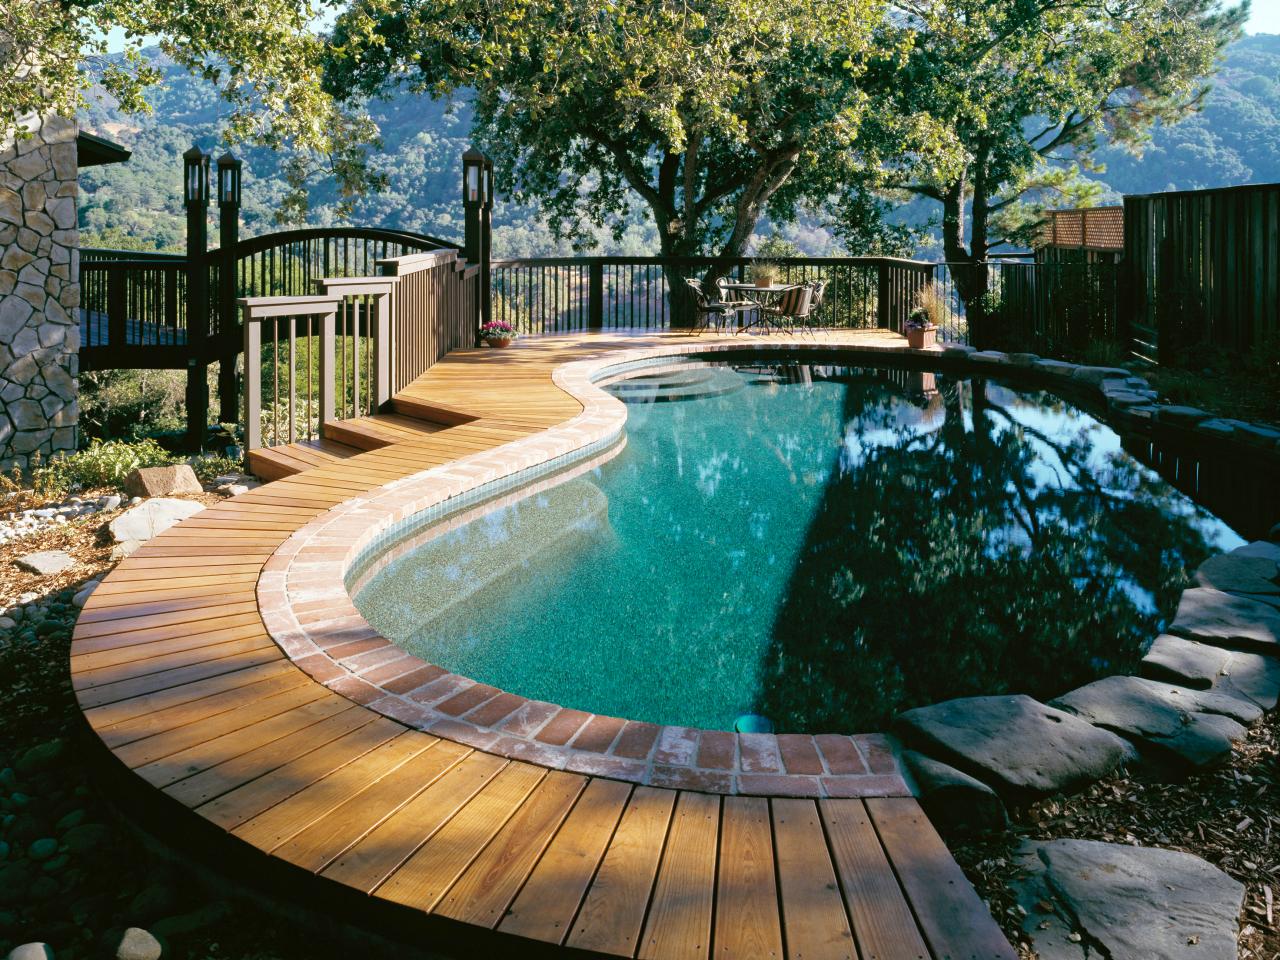 Pool Deck Designs And Options Diy, In Ground Pool Deck Ideas